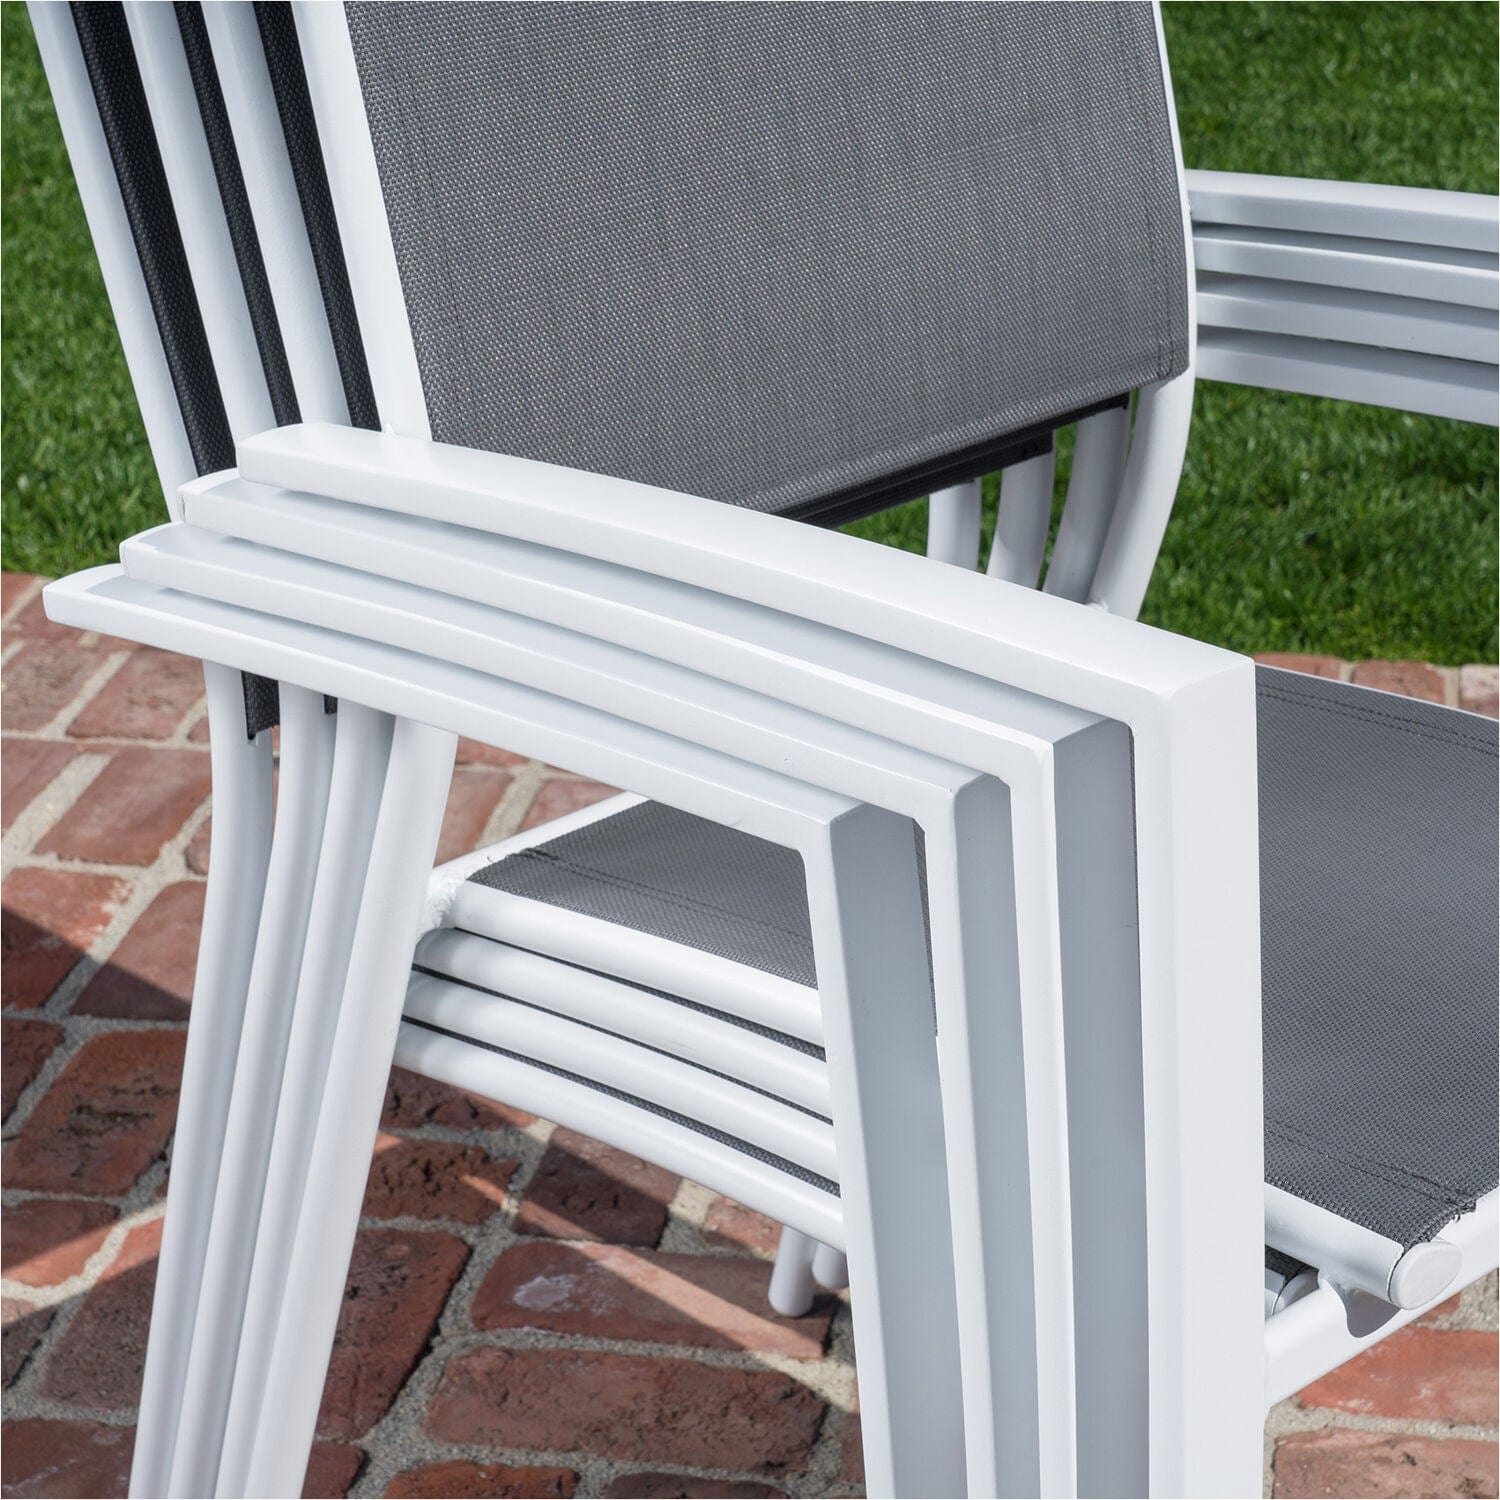 Hanover Outdoor Dining Set Conrad 5-Piece Compact Outdoor Dining Set w/ 4 Stackable Sling Chairs and Convertible Slatted Table, White Frame / Gray Sling CONDN5PC-WHT